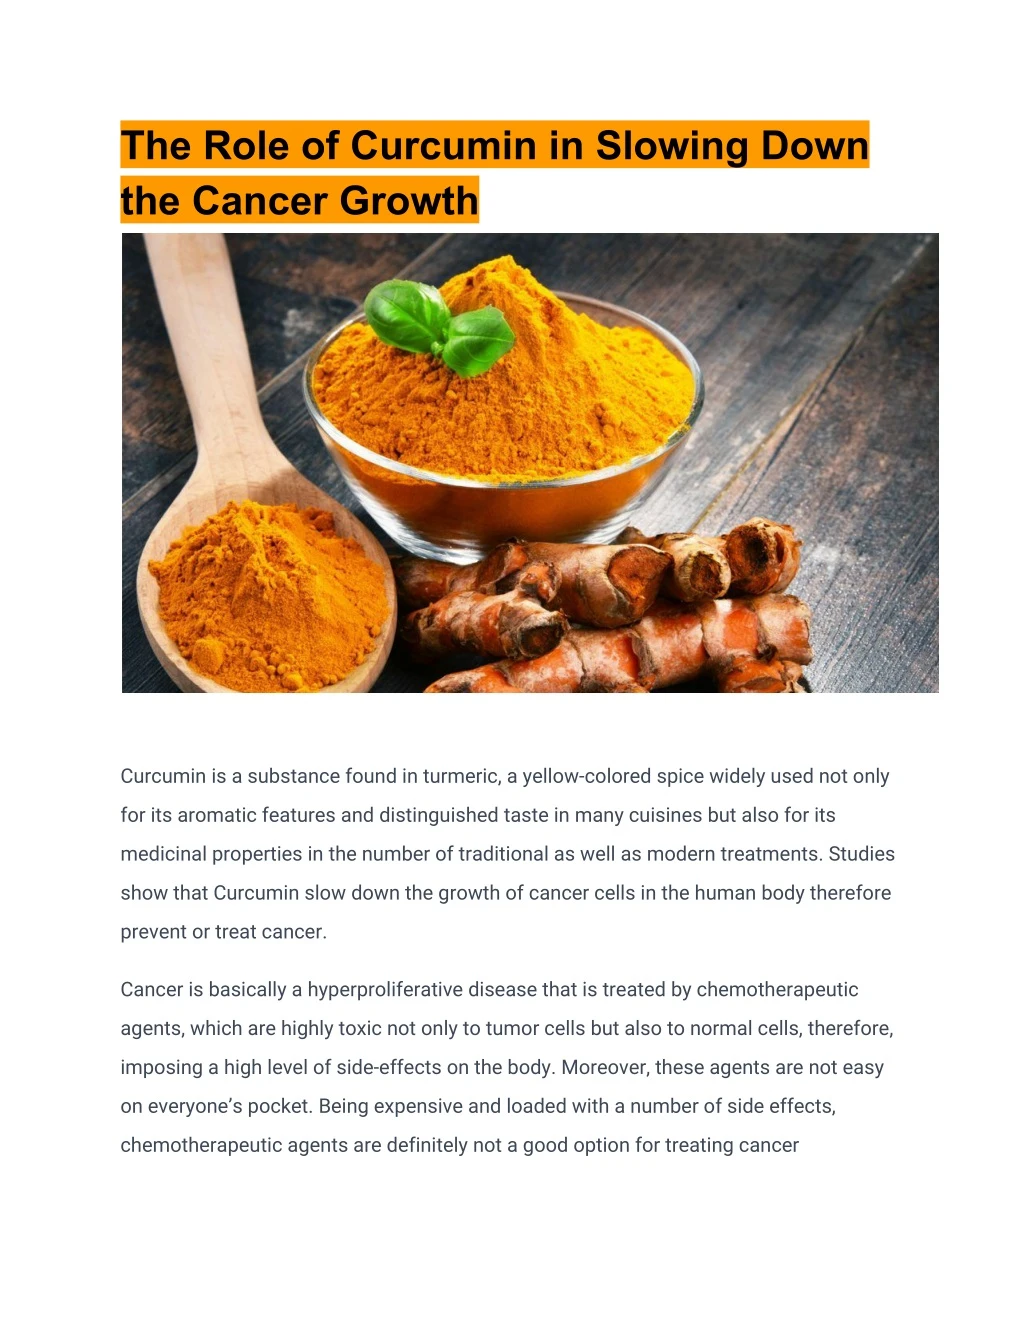 the role of curcumin in slowing down the cancer